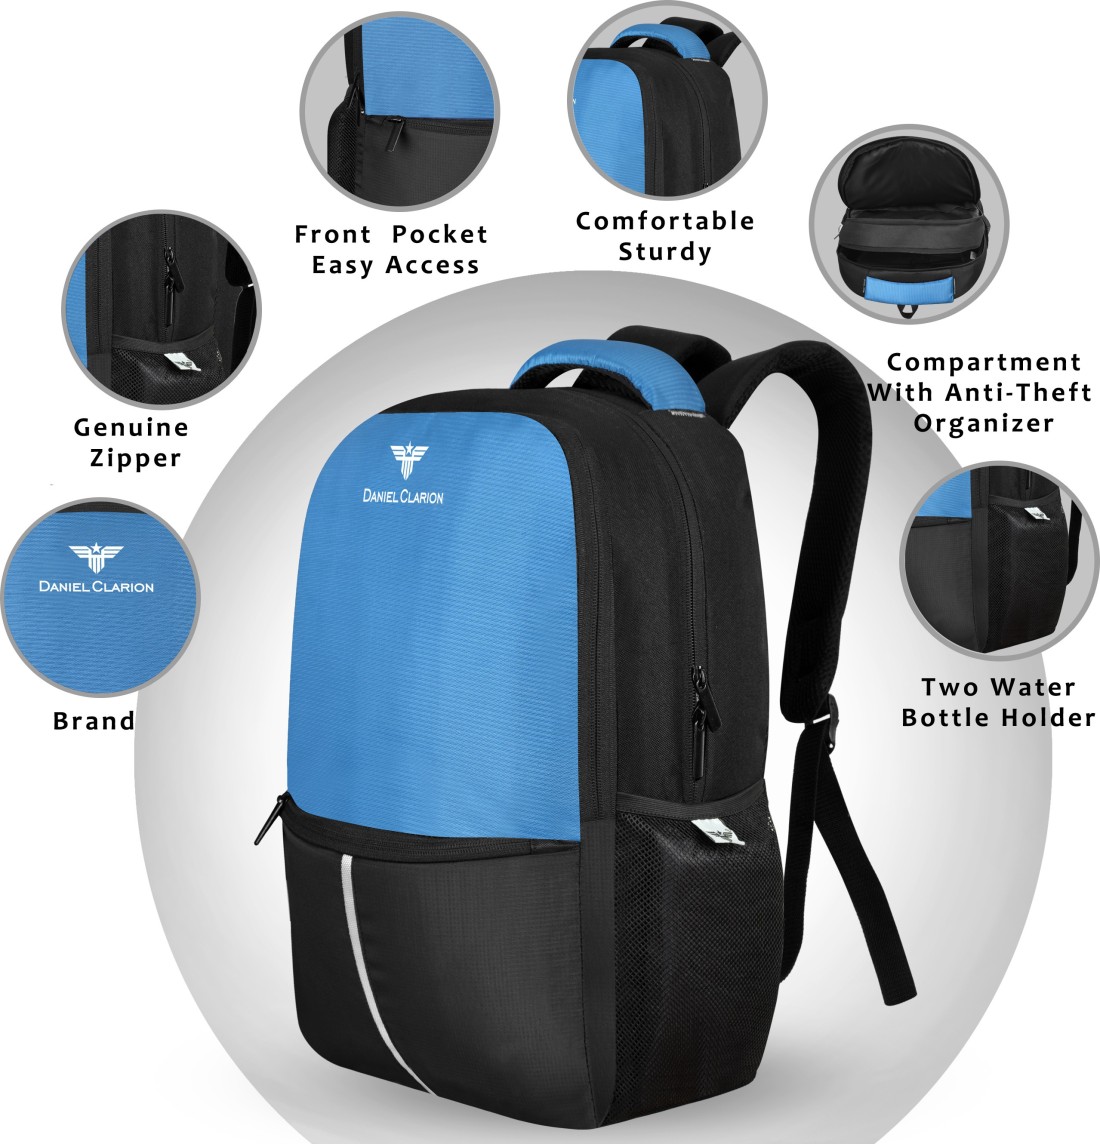 Sea to Sky -The Waterproof Backpack That Fits In Your Pocket by